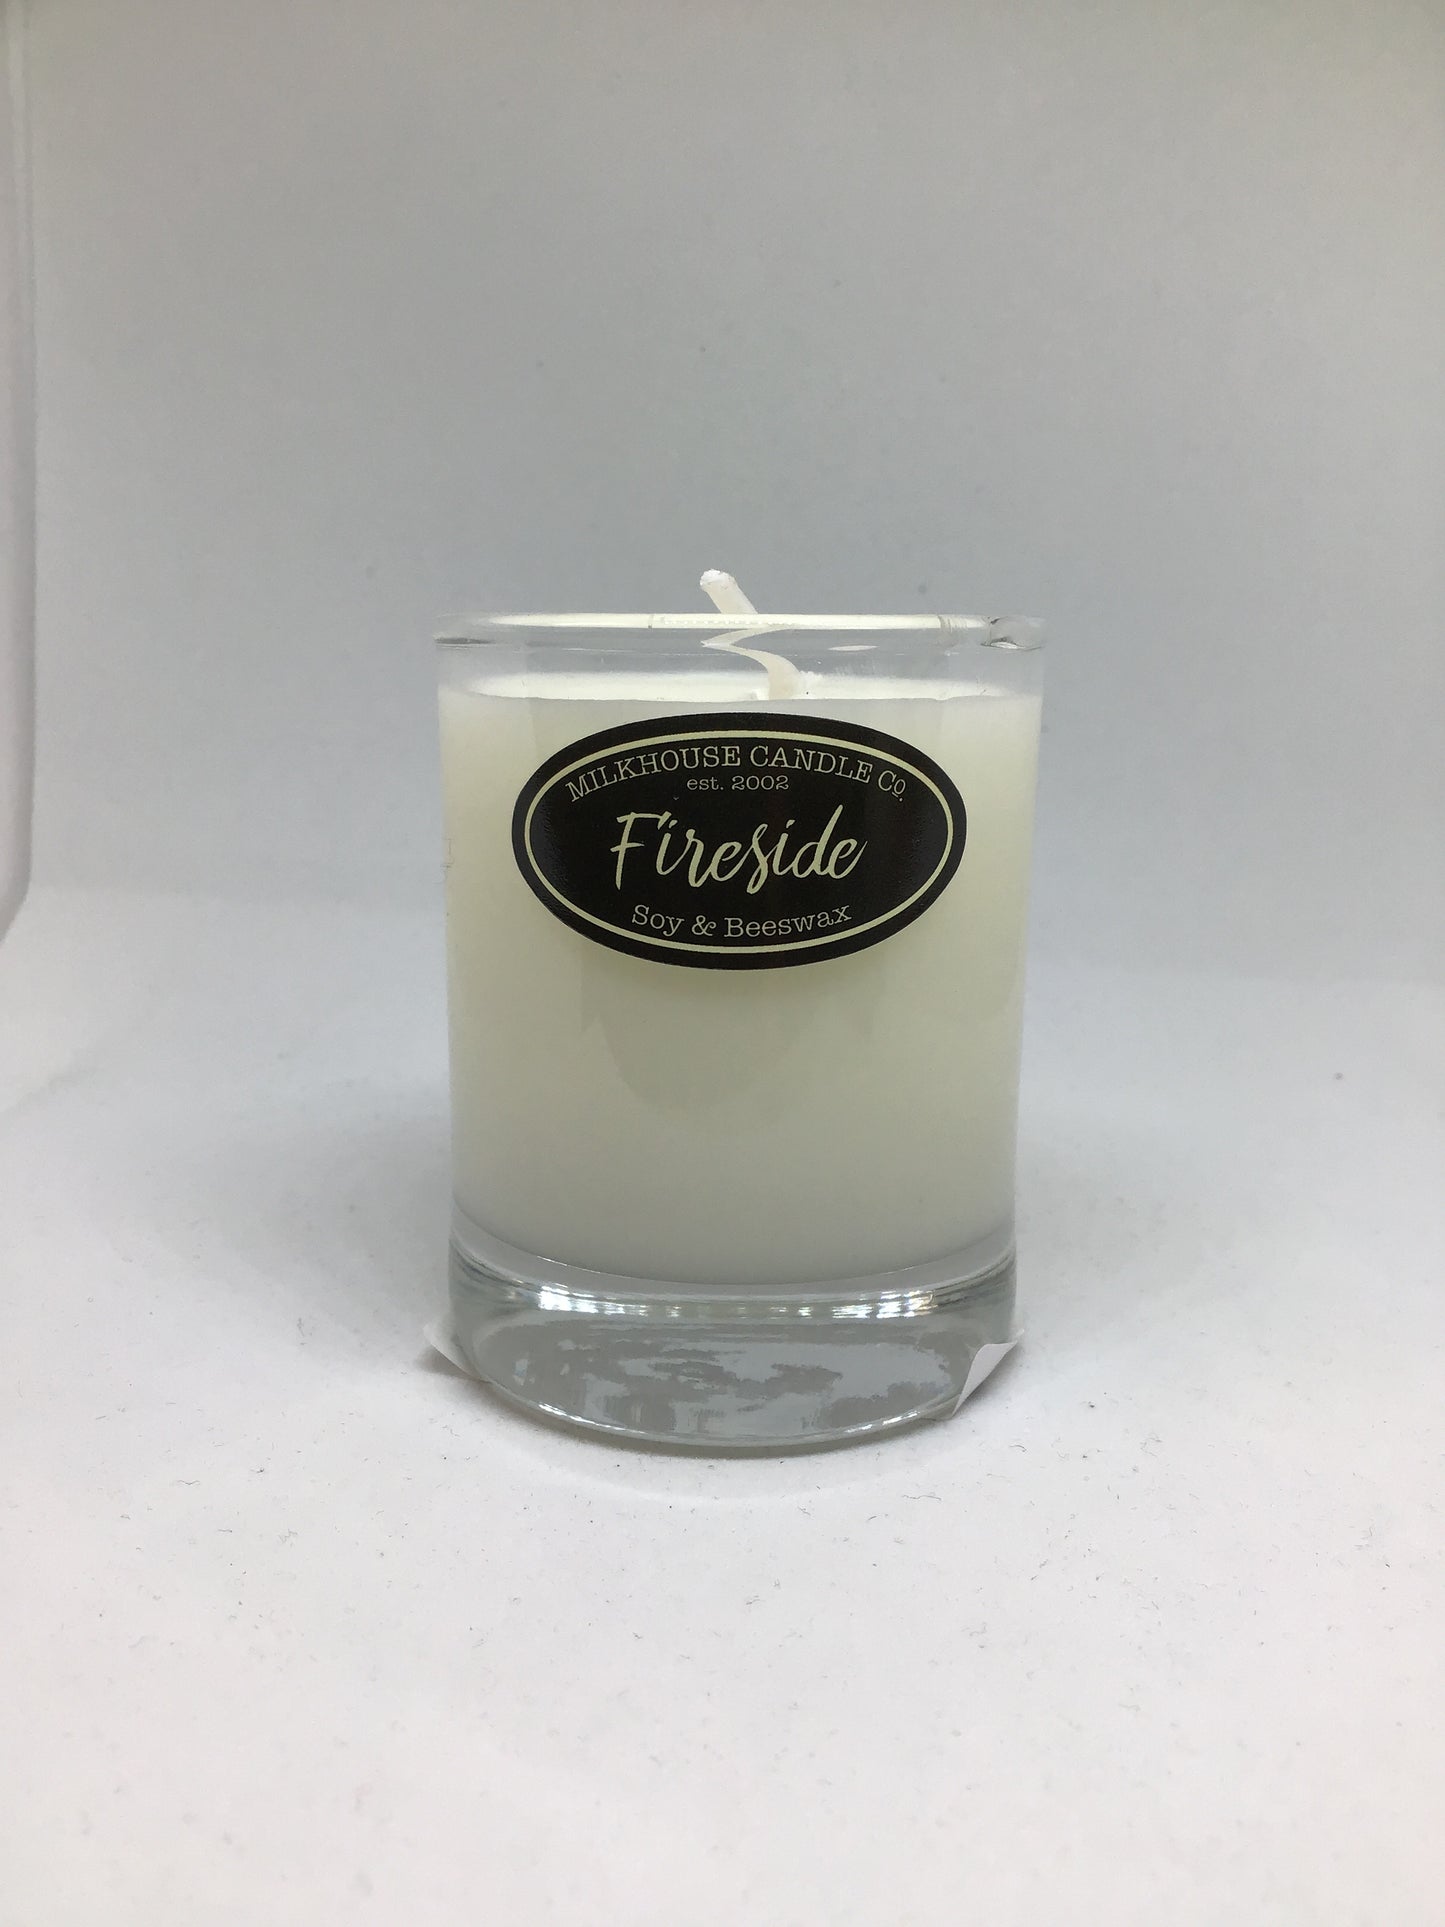 Butter Shot Milkhouse Candle